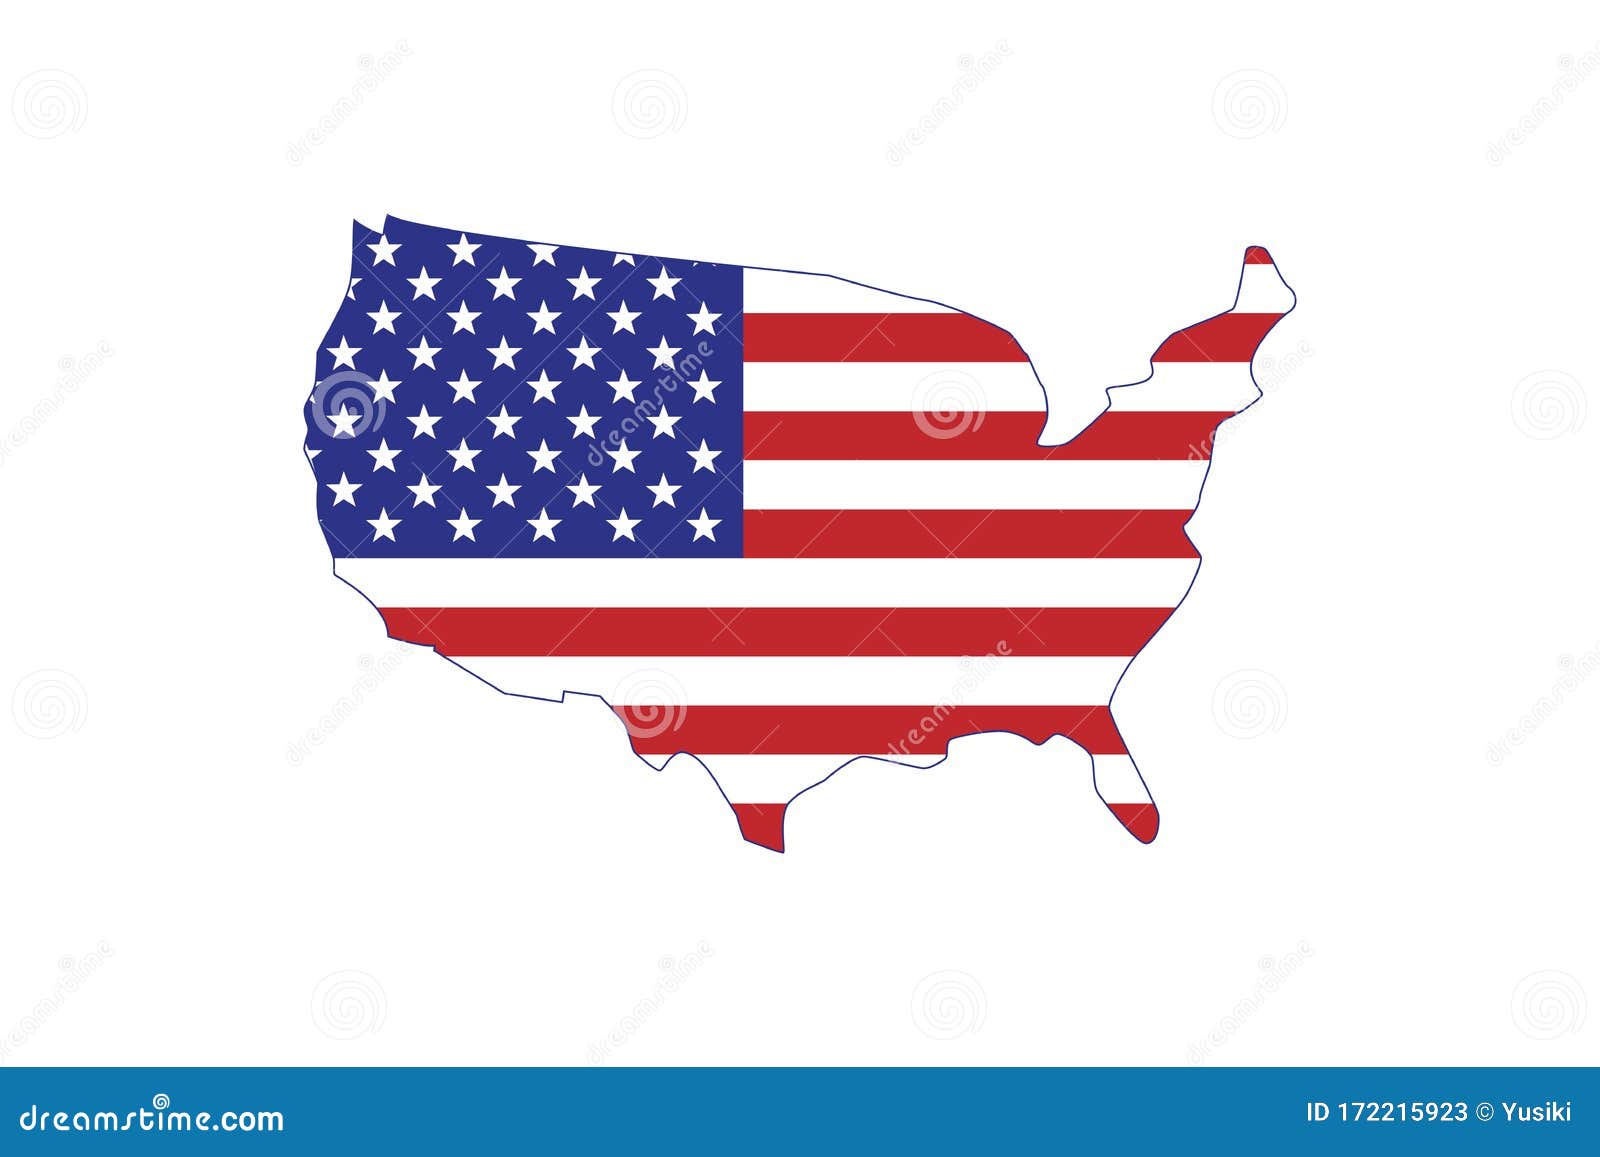 Download Outline Map Of The United States Of America. Silhouette Of ...